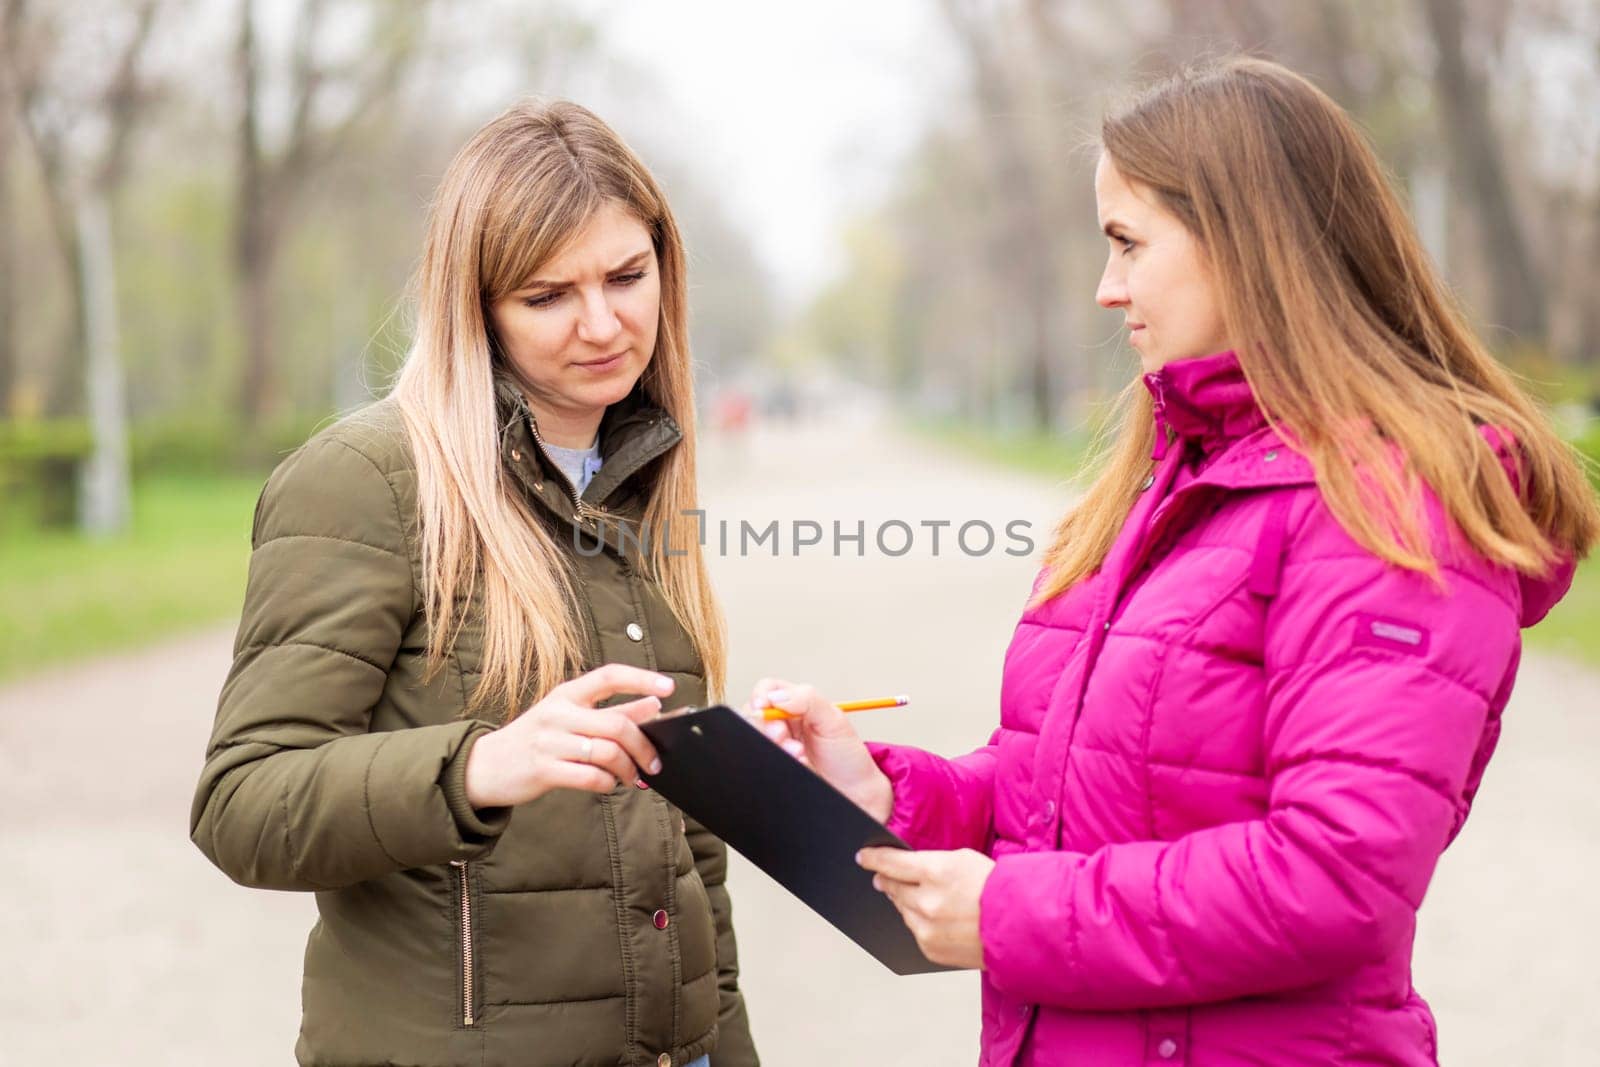 Opinion poll. A woman interviewing people, conducting survey standing outdoor.